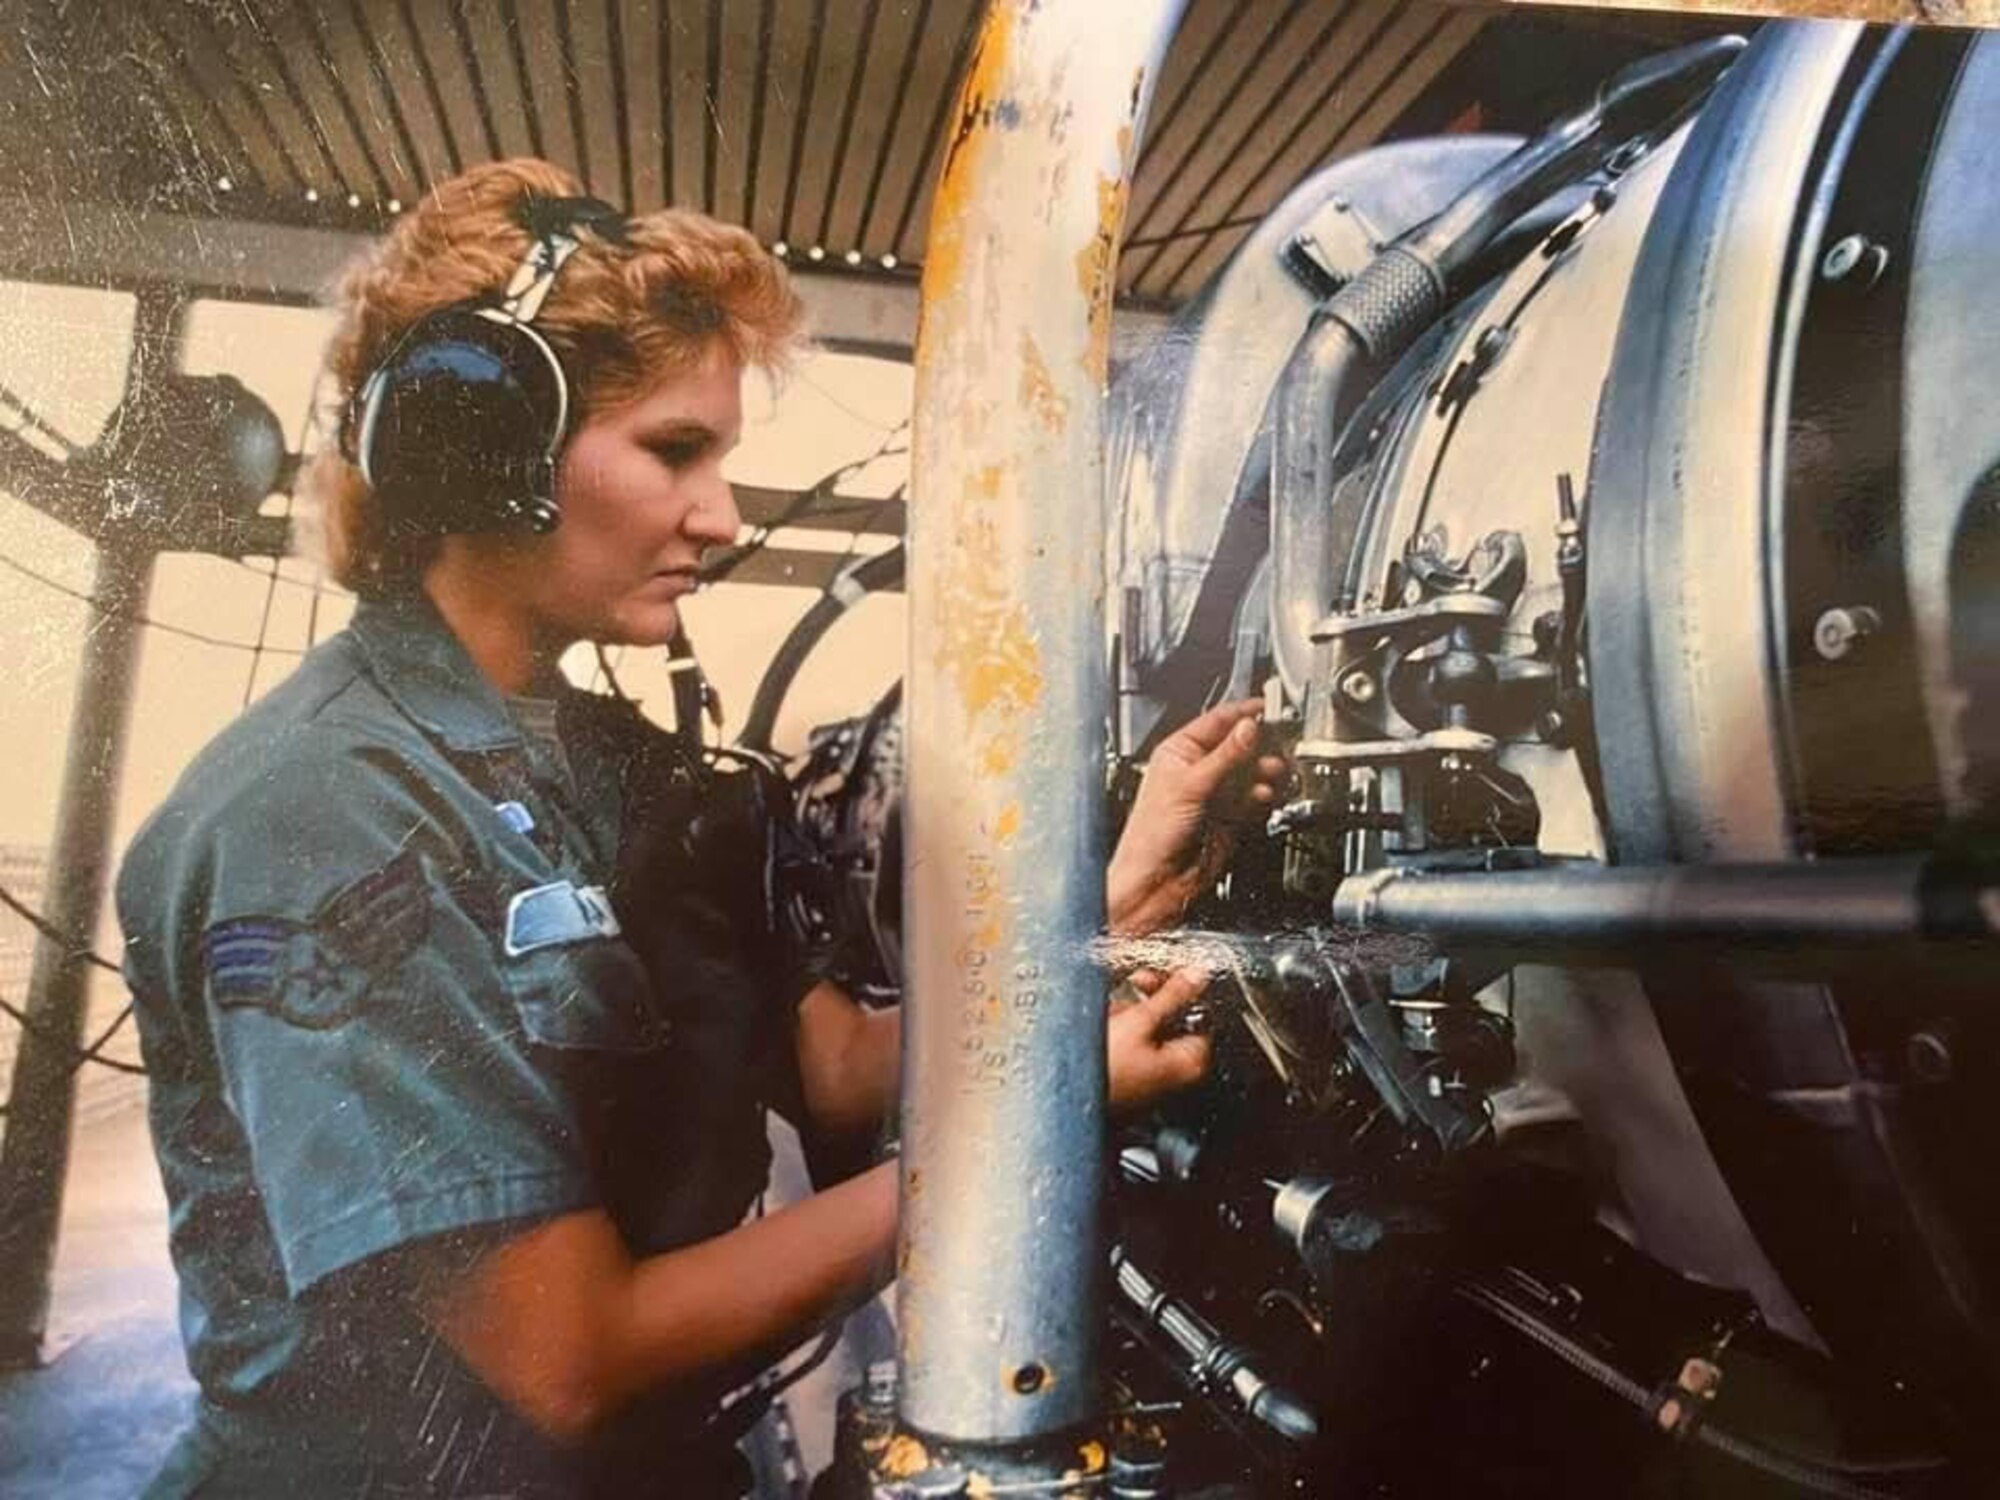 U.S. Air Force Airman Teresa Reson works on a jet engine while serving at George Air Force Base.